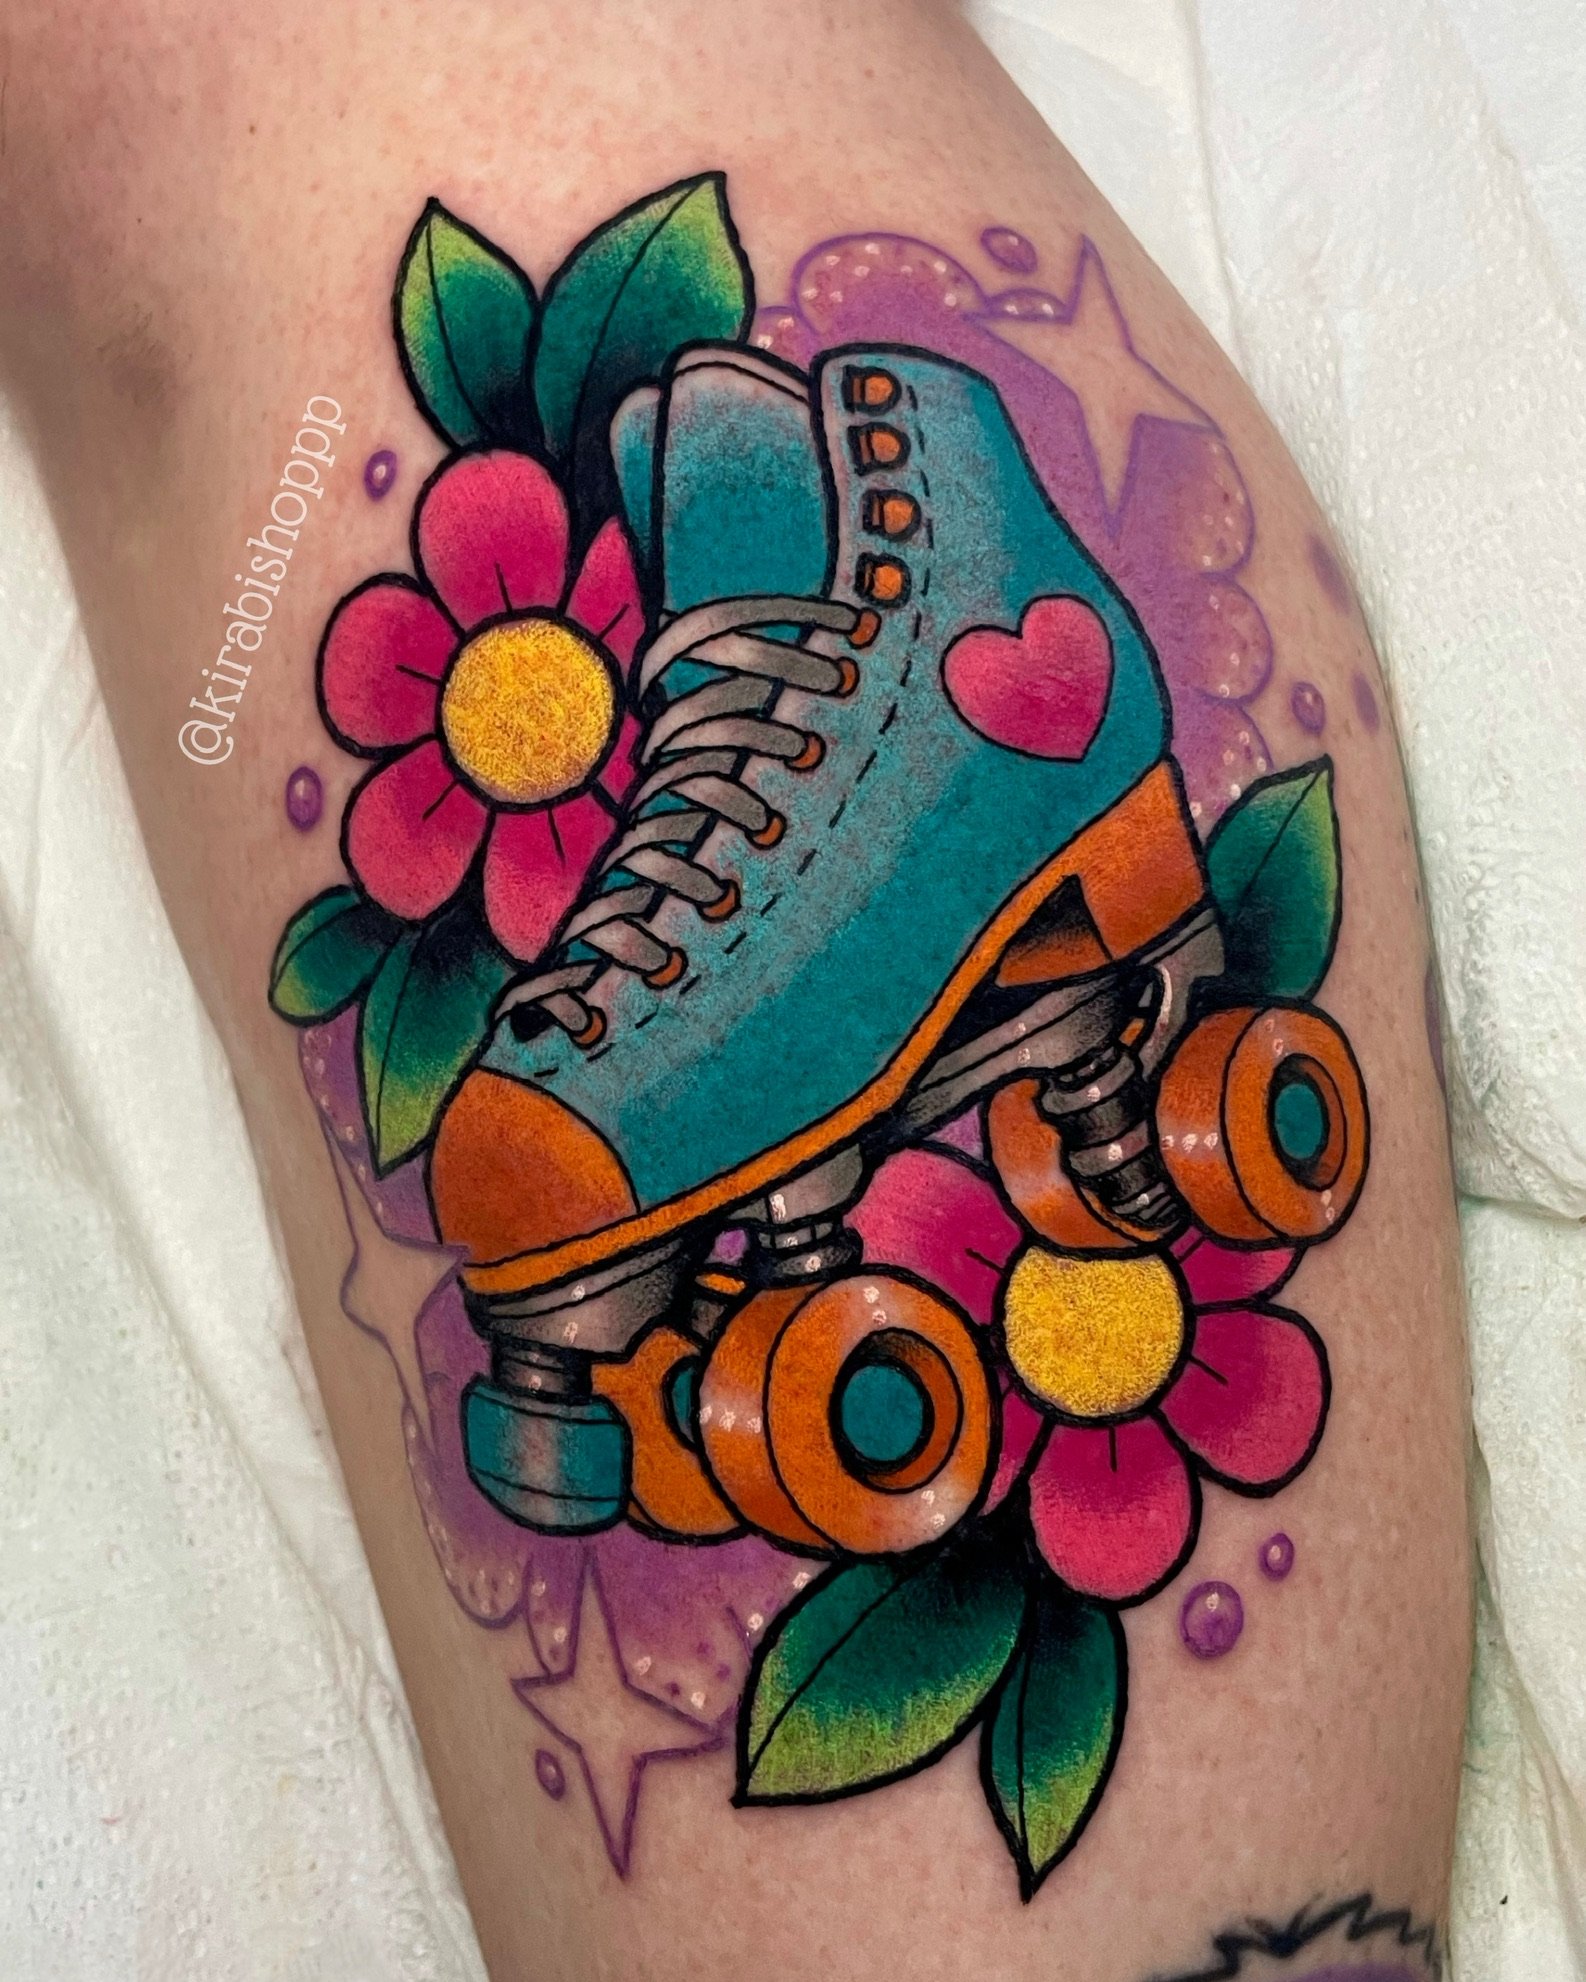 Saw someone share their roller skating tattoo and I thought Id share mine  too  rRollerskating